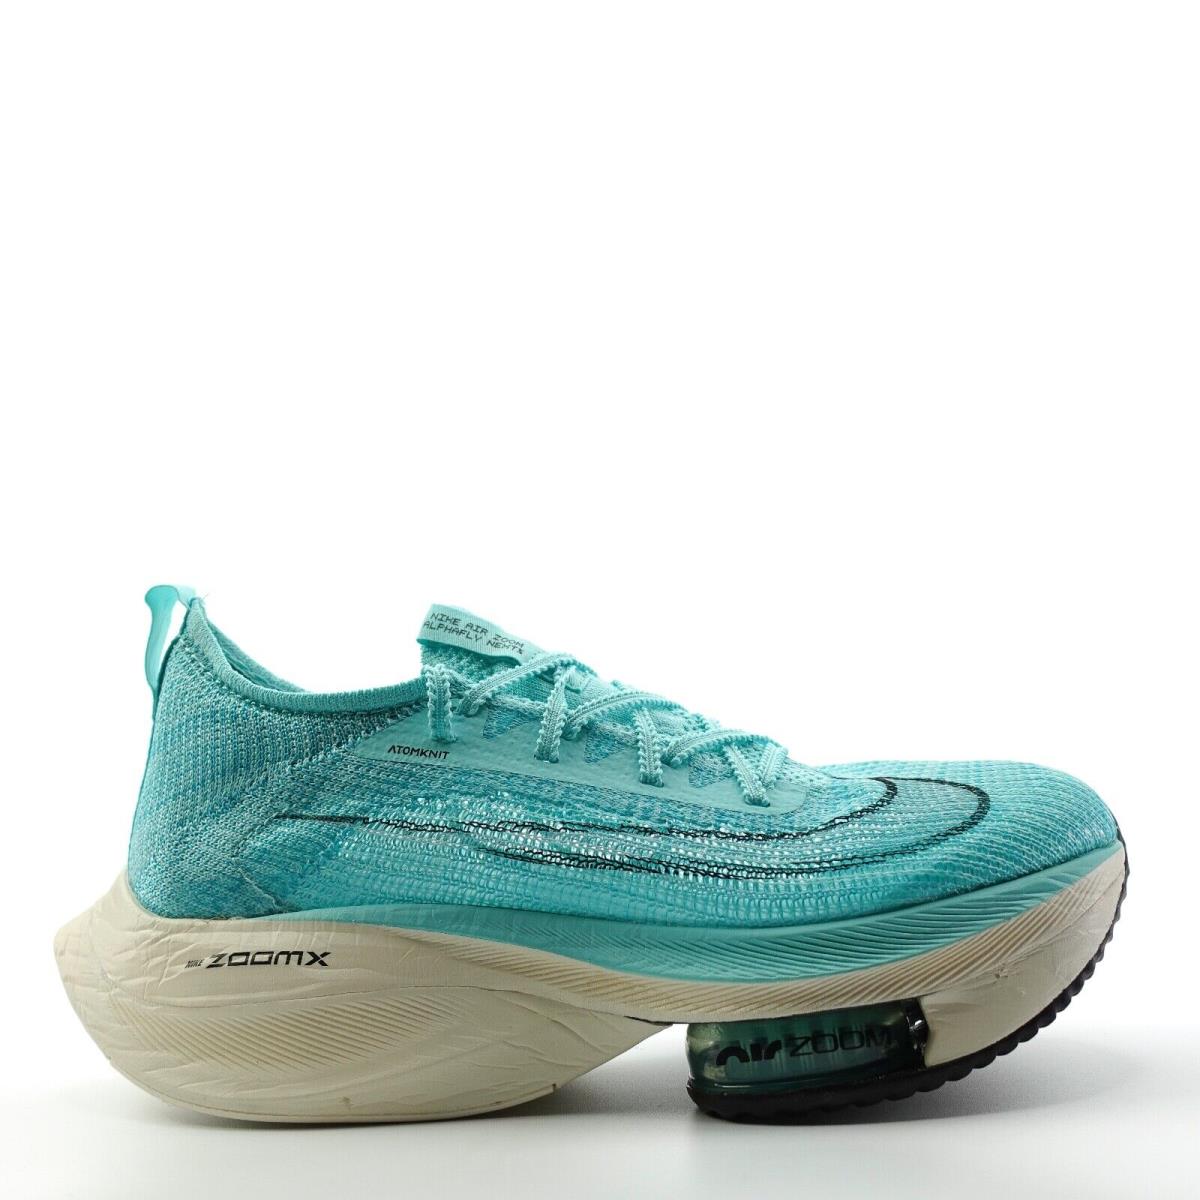 Nike Air Zoom Alphafly Next% Turquoise Running Shoes CZ1514-300 Womens Size 8.5 | 883212070883 - Nike shoes Air Zoom - Green | SporTipTop